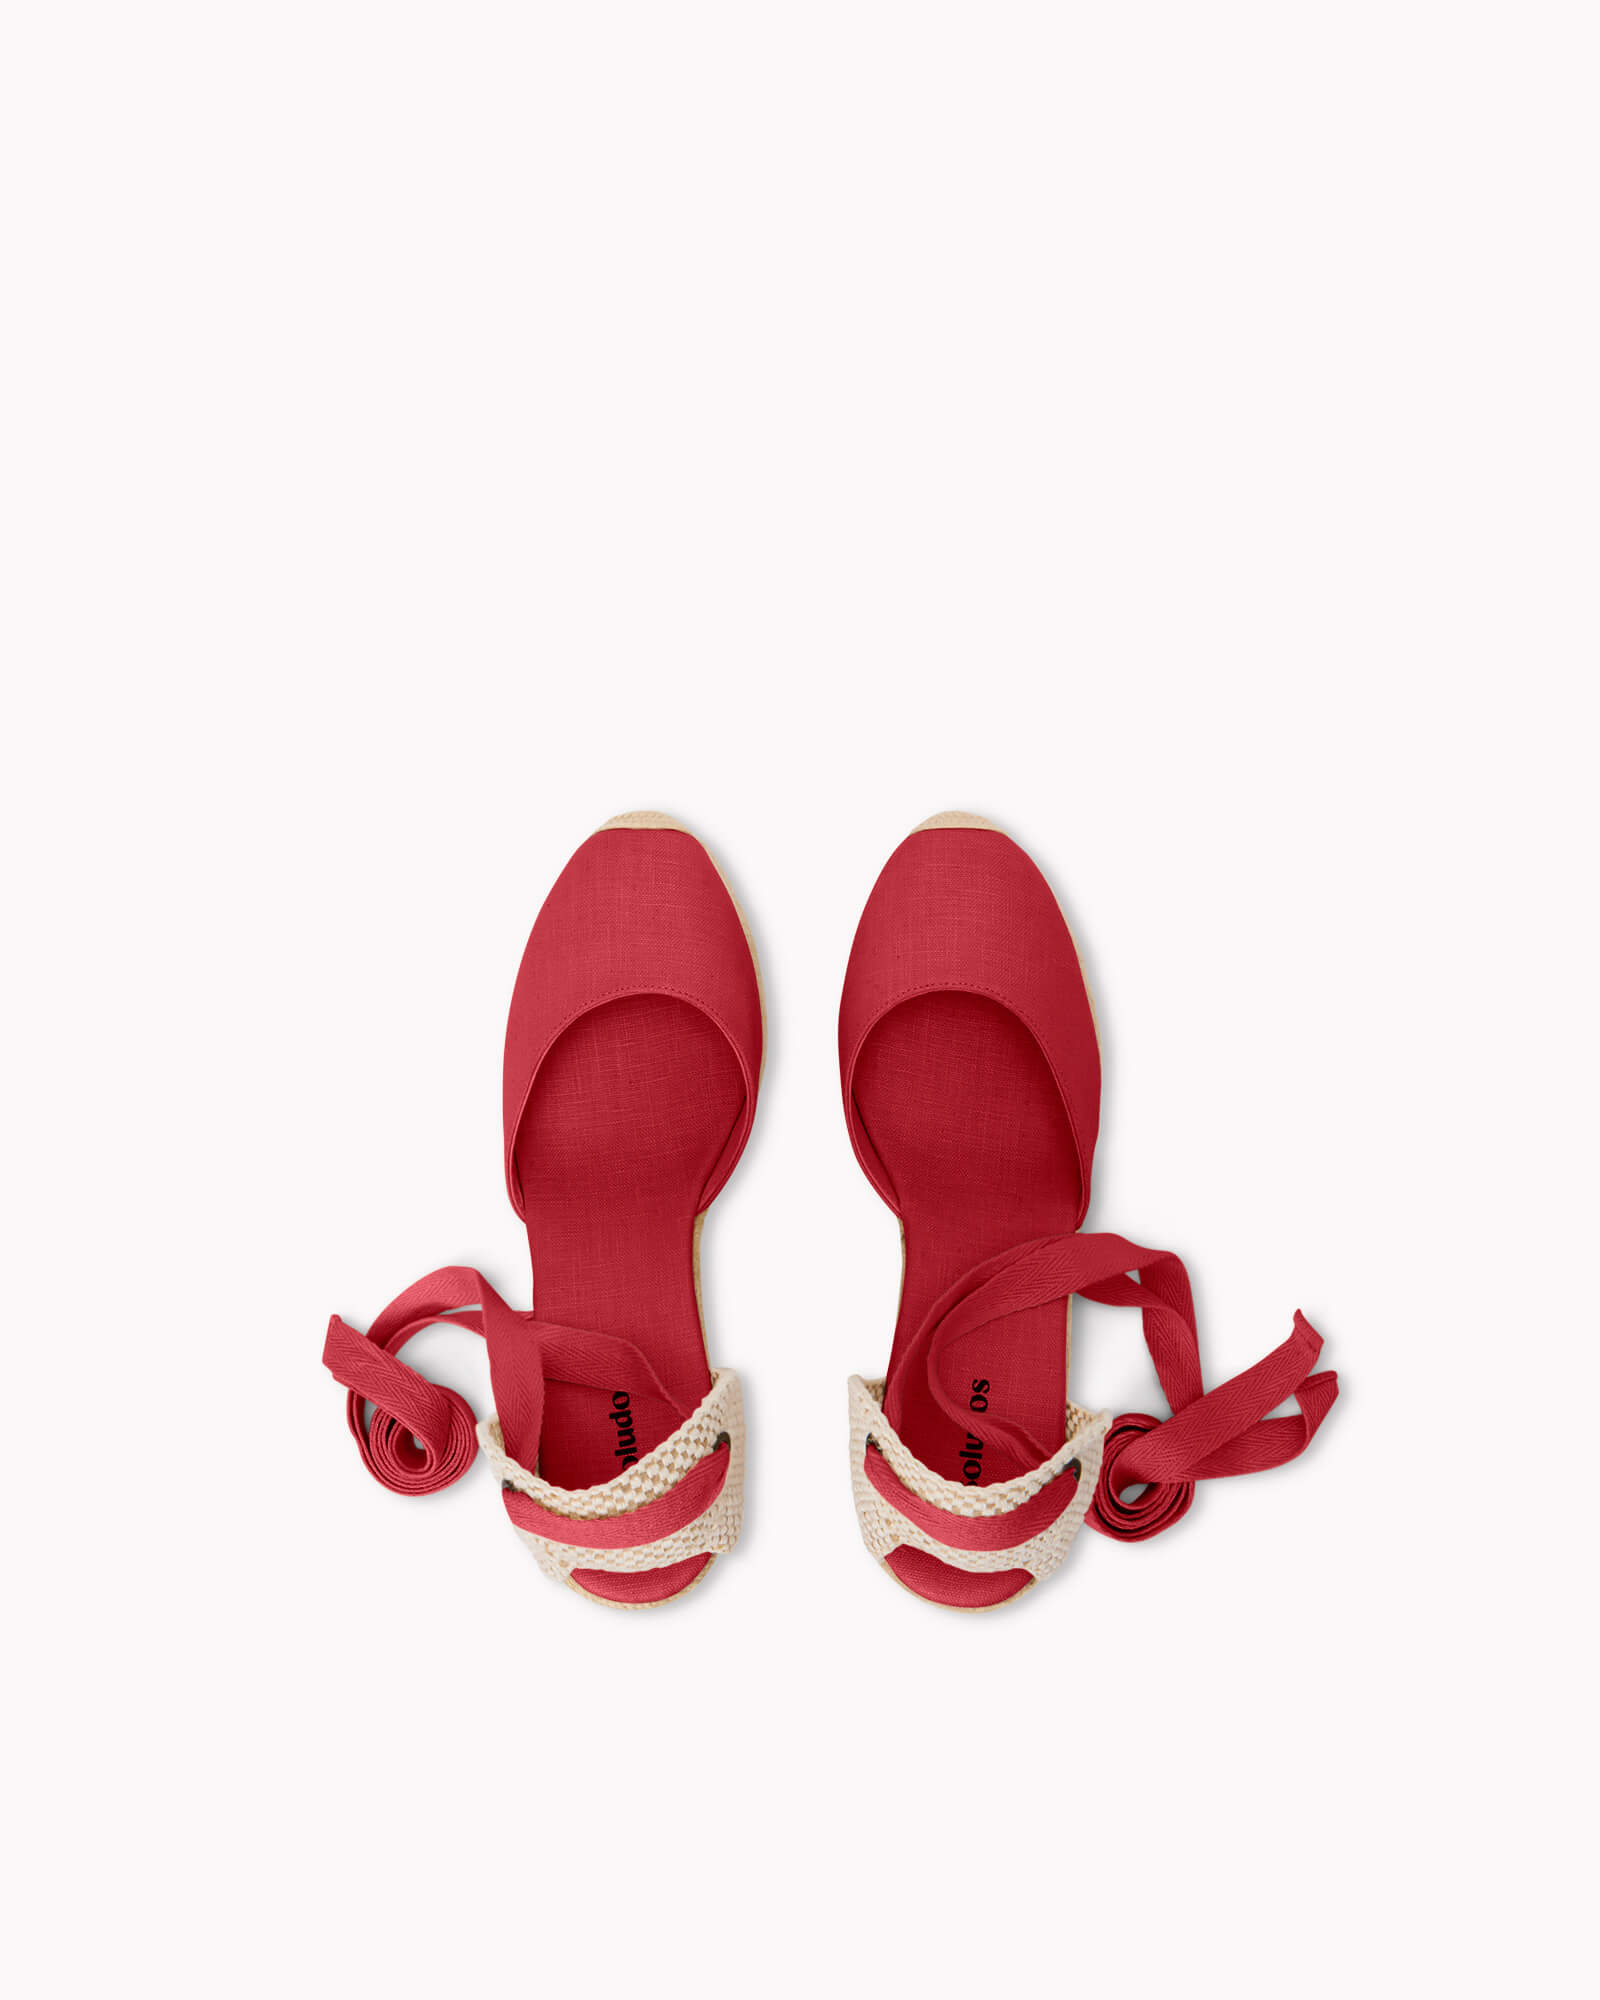 The Platform Wedge - Classic - Reef Red